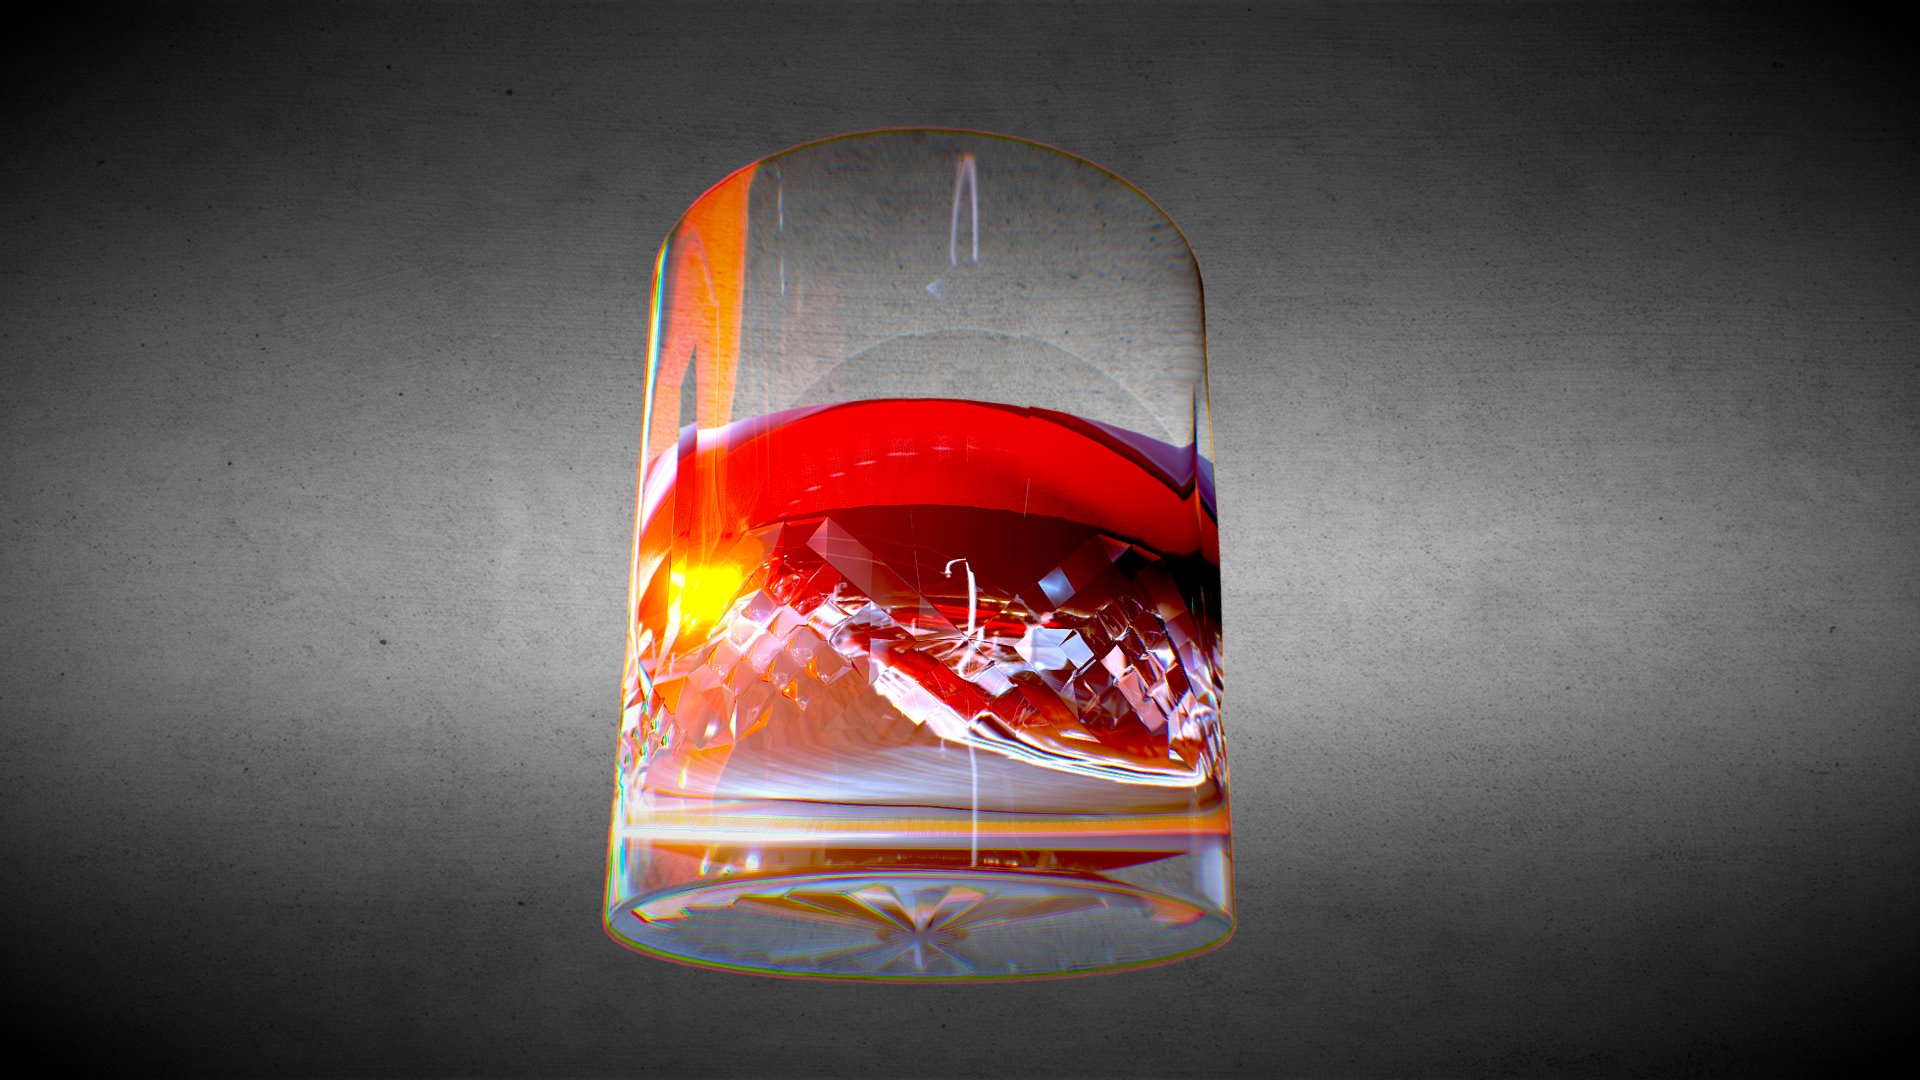 3D model Whisky Glass - This is a 3D model of the Whisky Glass. The 3D model is about a glass with a red and yellow liquid in it.